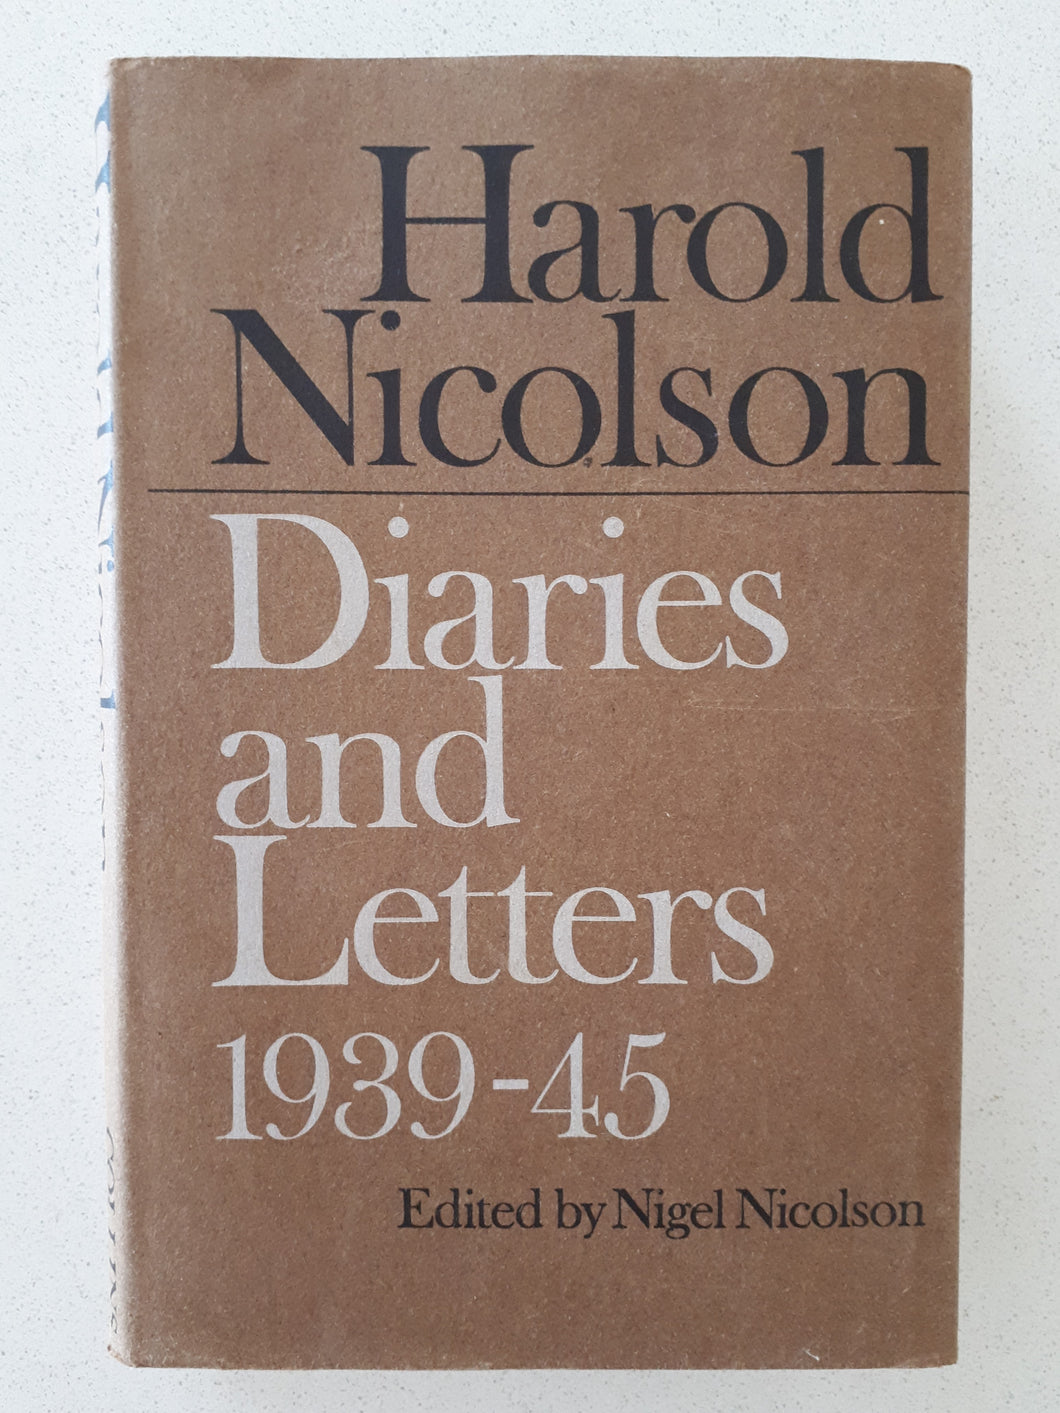 Diaries and Letters 1939-45 by Harold Nicolson 